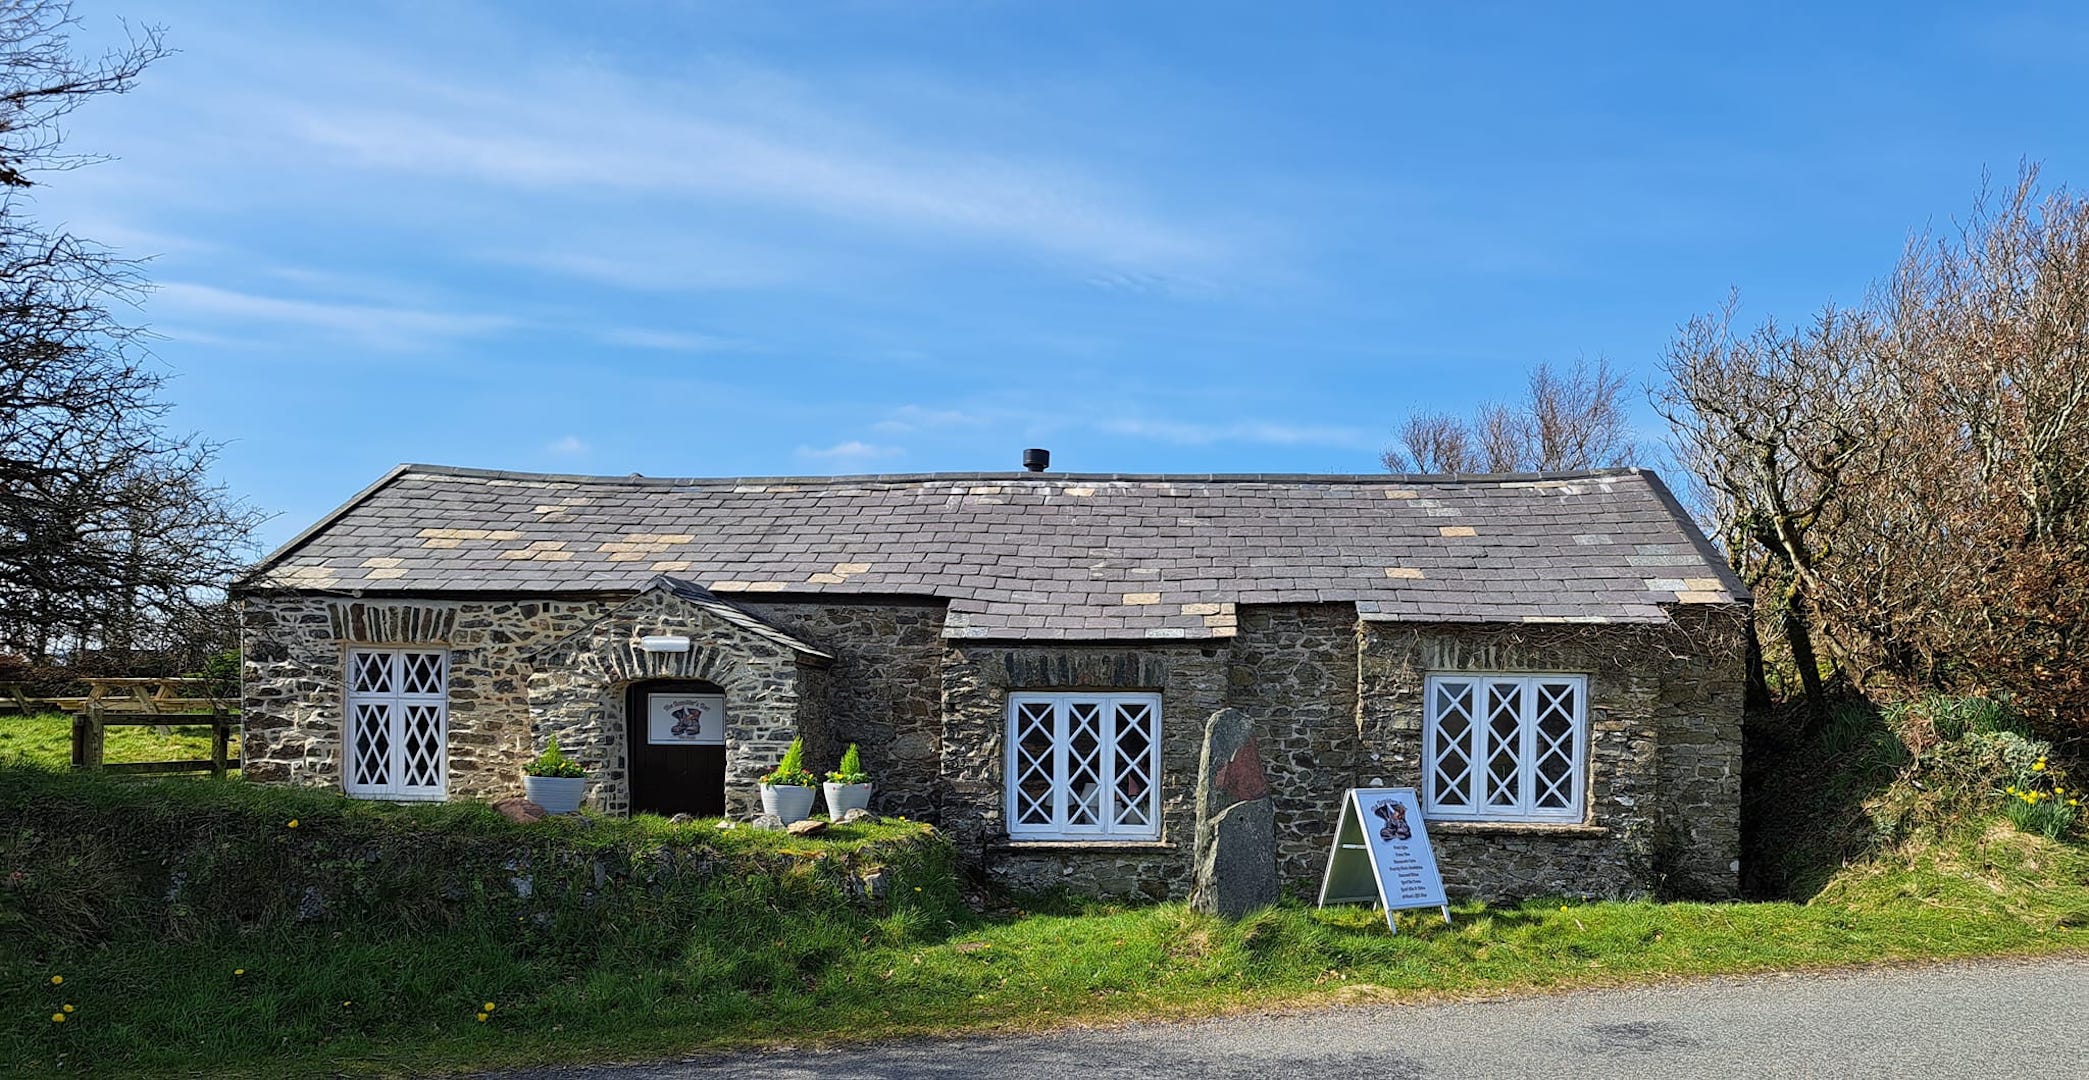 Ramblers Rest Tearooms is a single story, stone-built tearooms with latticework iron windows surrounded by shrubs and fields near Lynmouth.